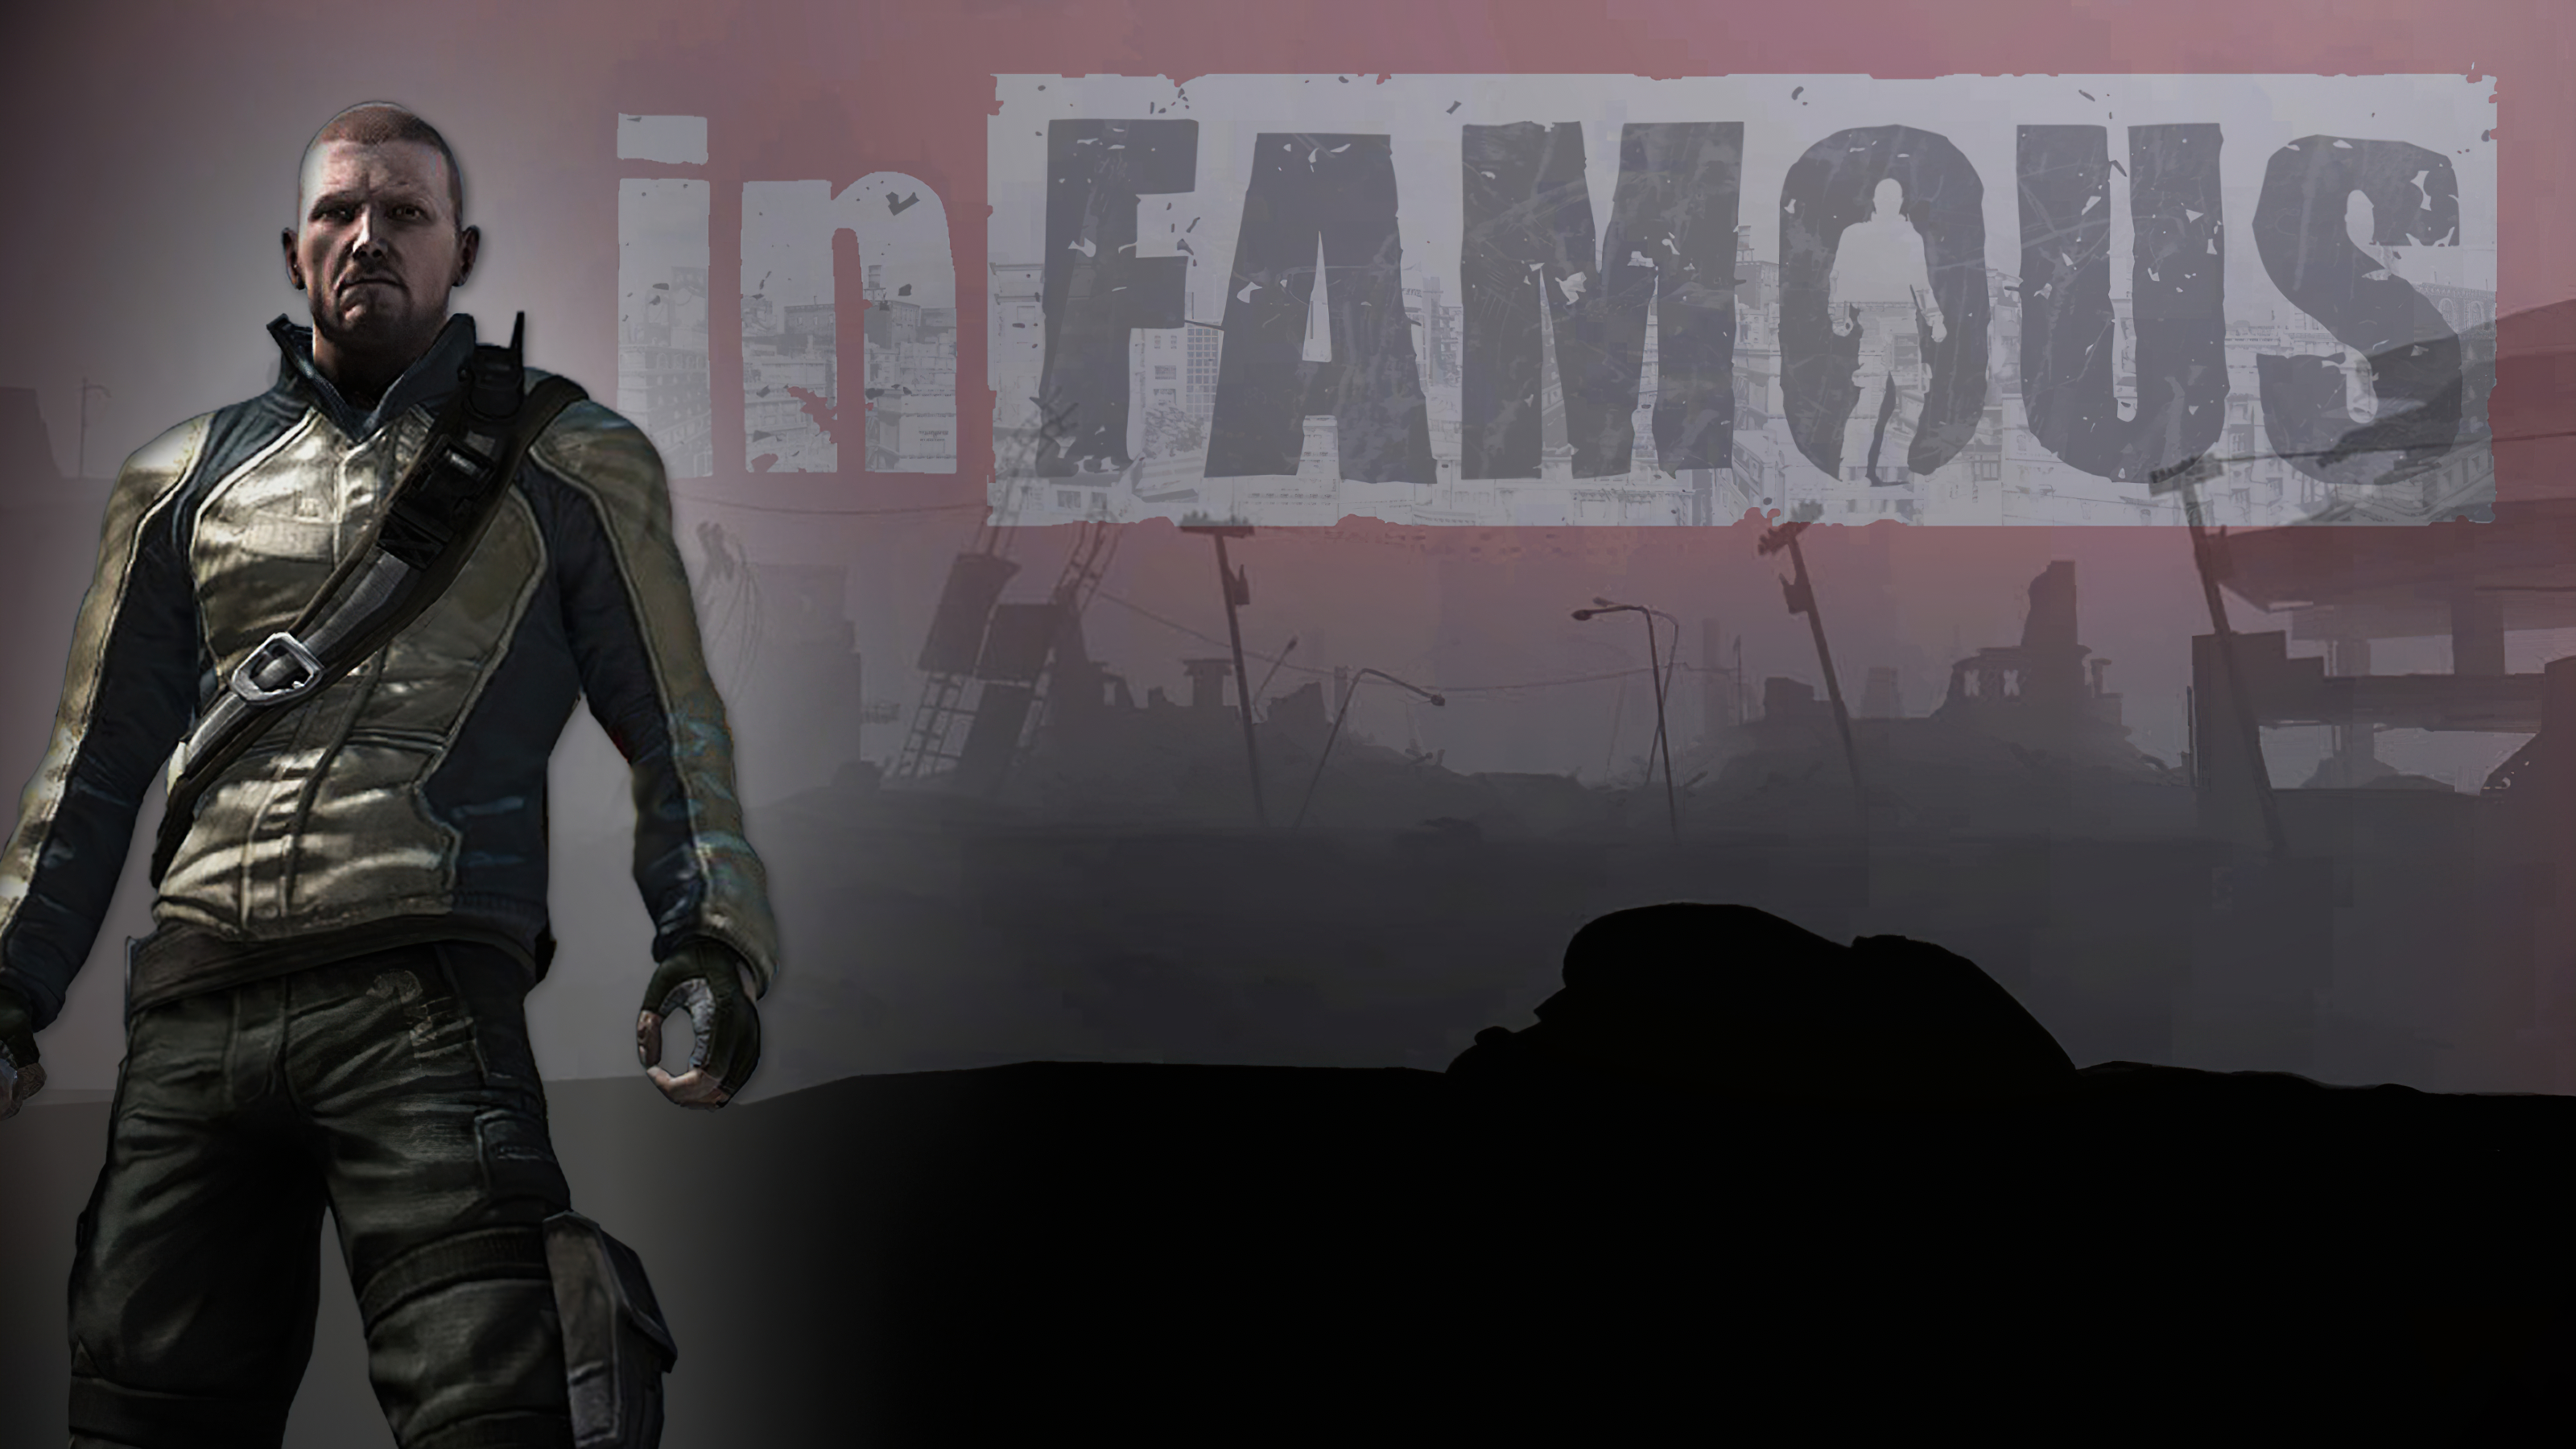 Video Game InFAMOUS 3200x1800